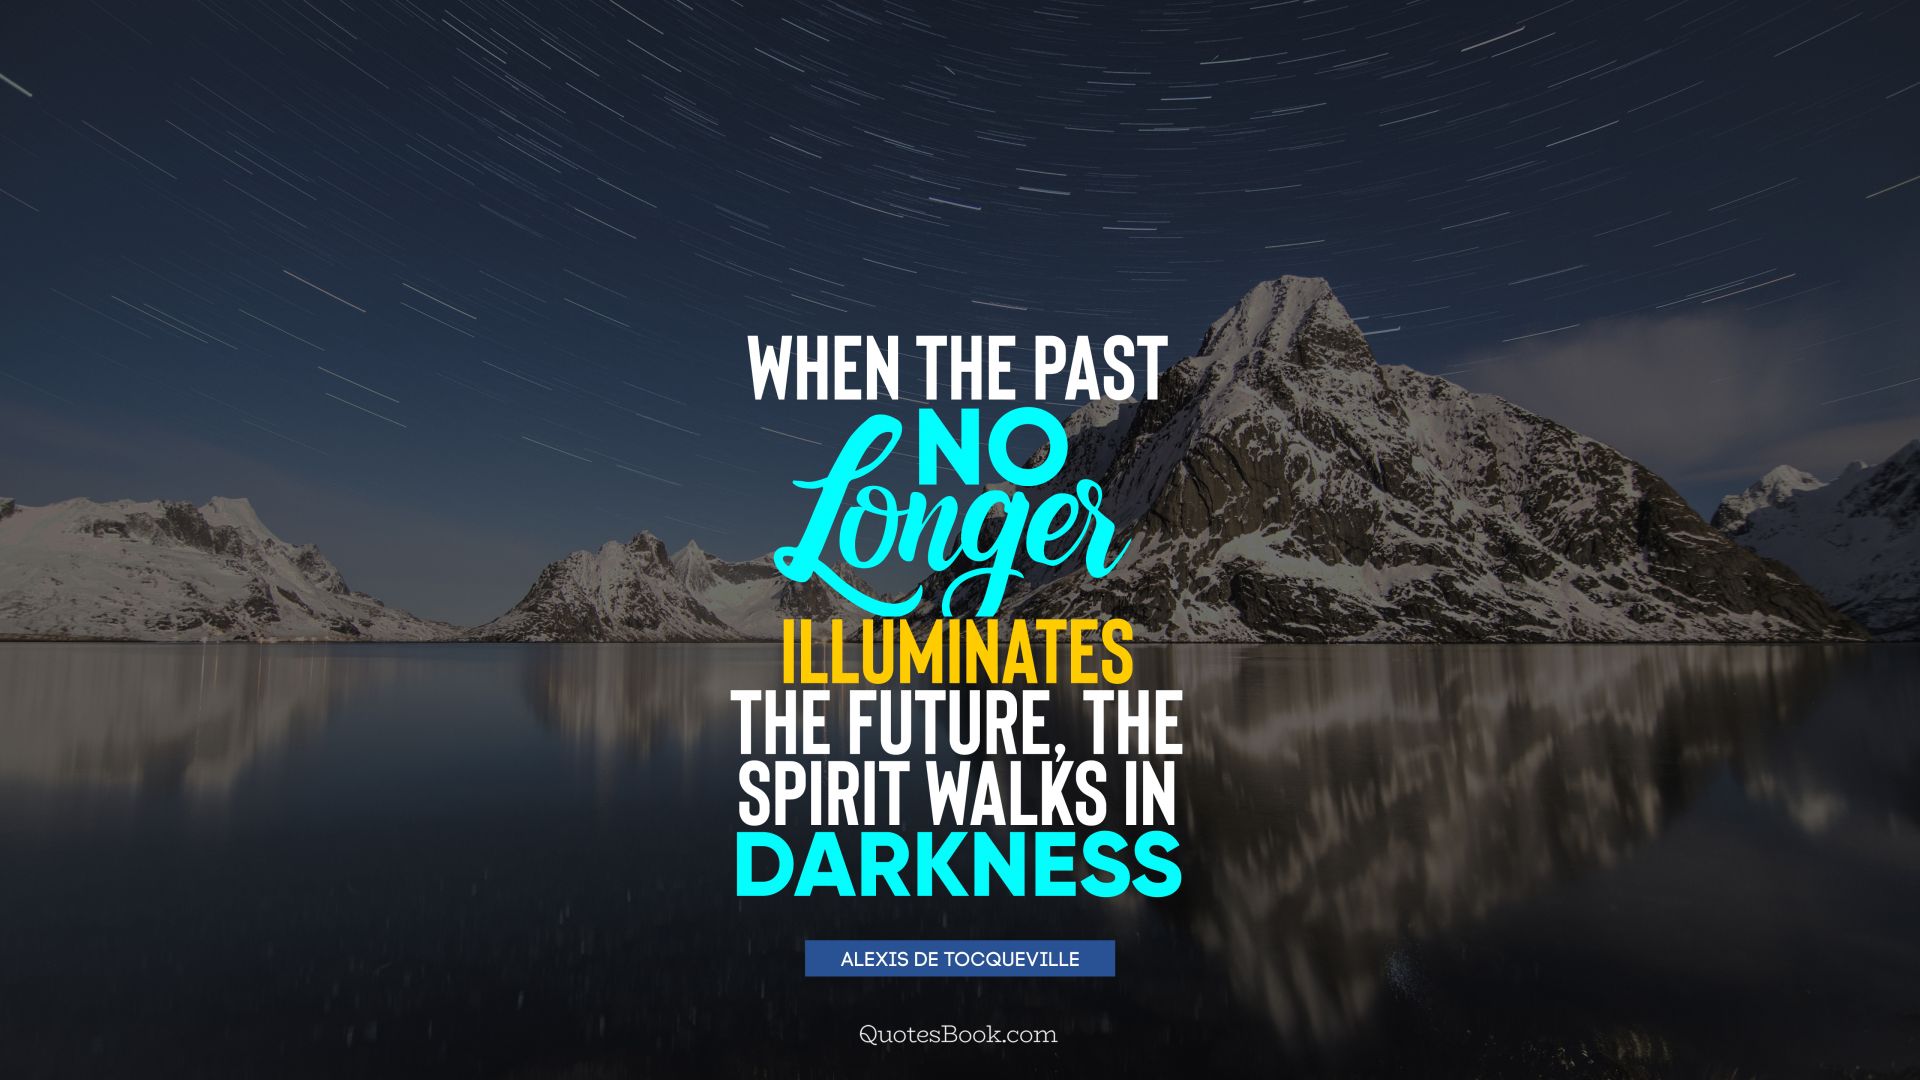 When the past no longer illuminates the future, the spirit walks in darkness. - Quote by Alexis de Tocqueville